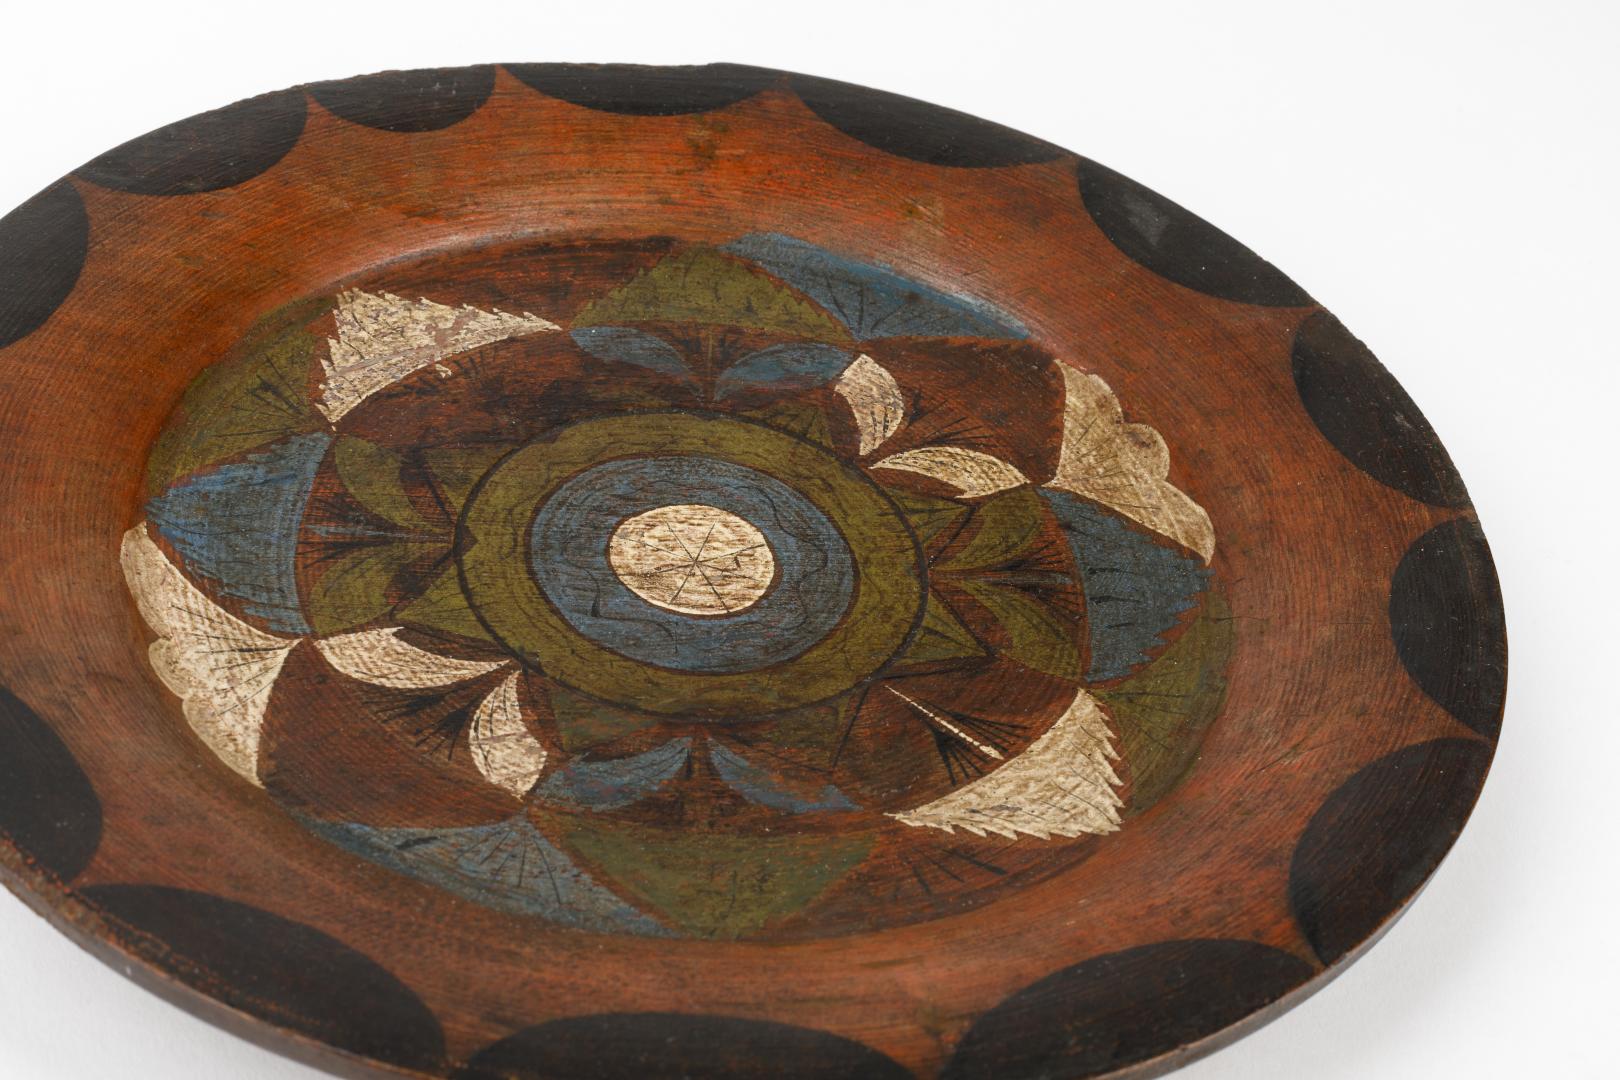 Painted wooden plate